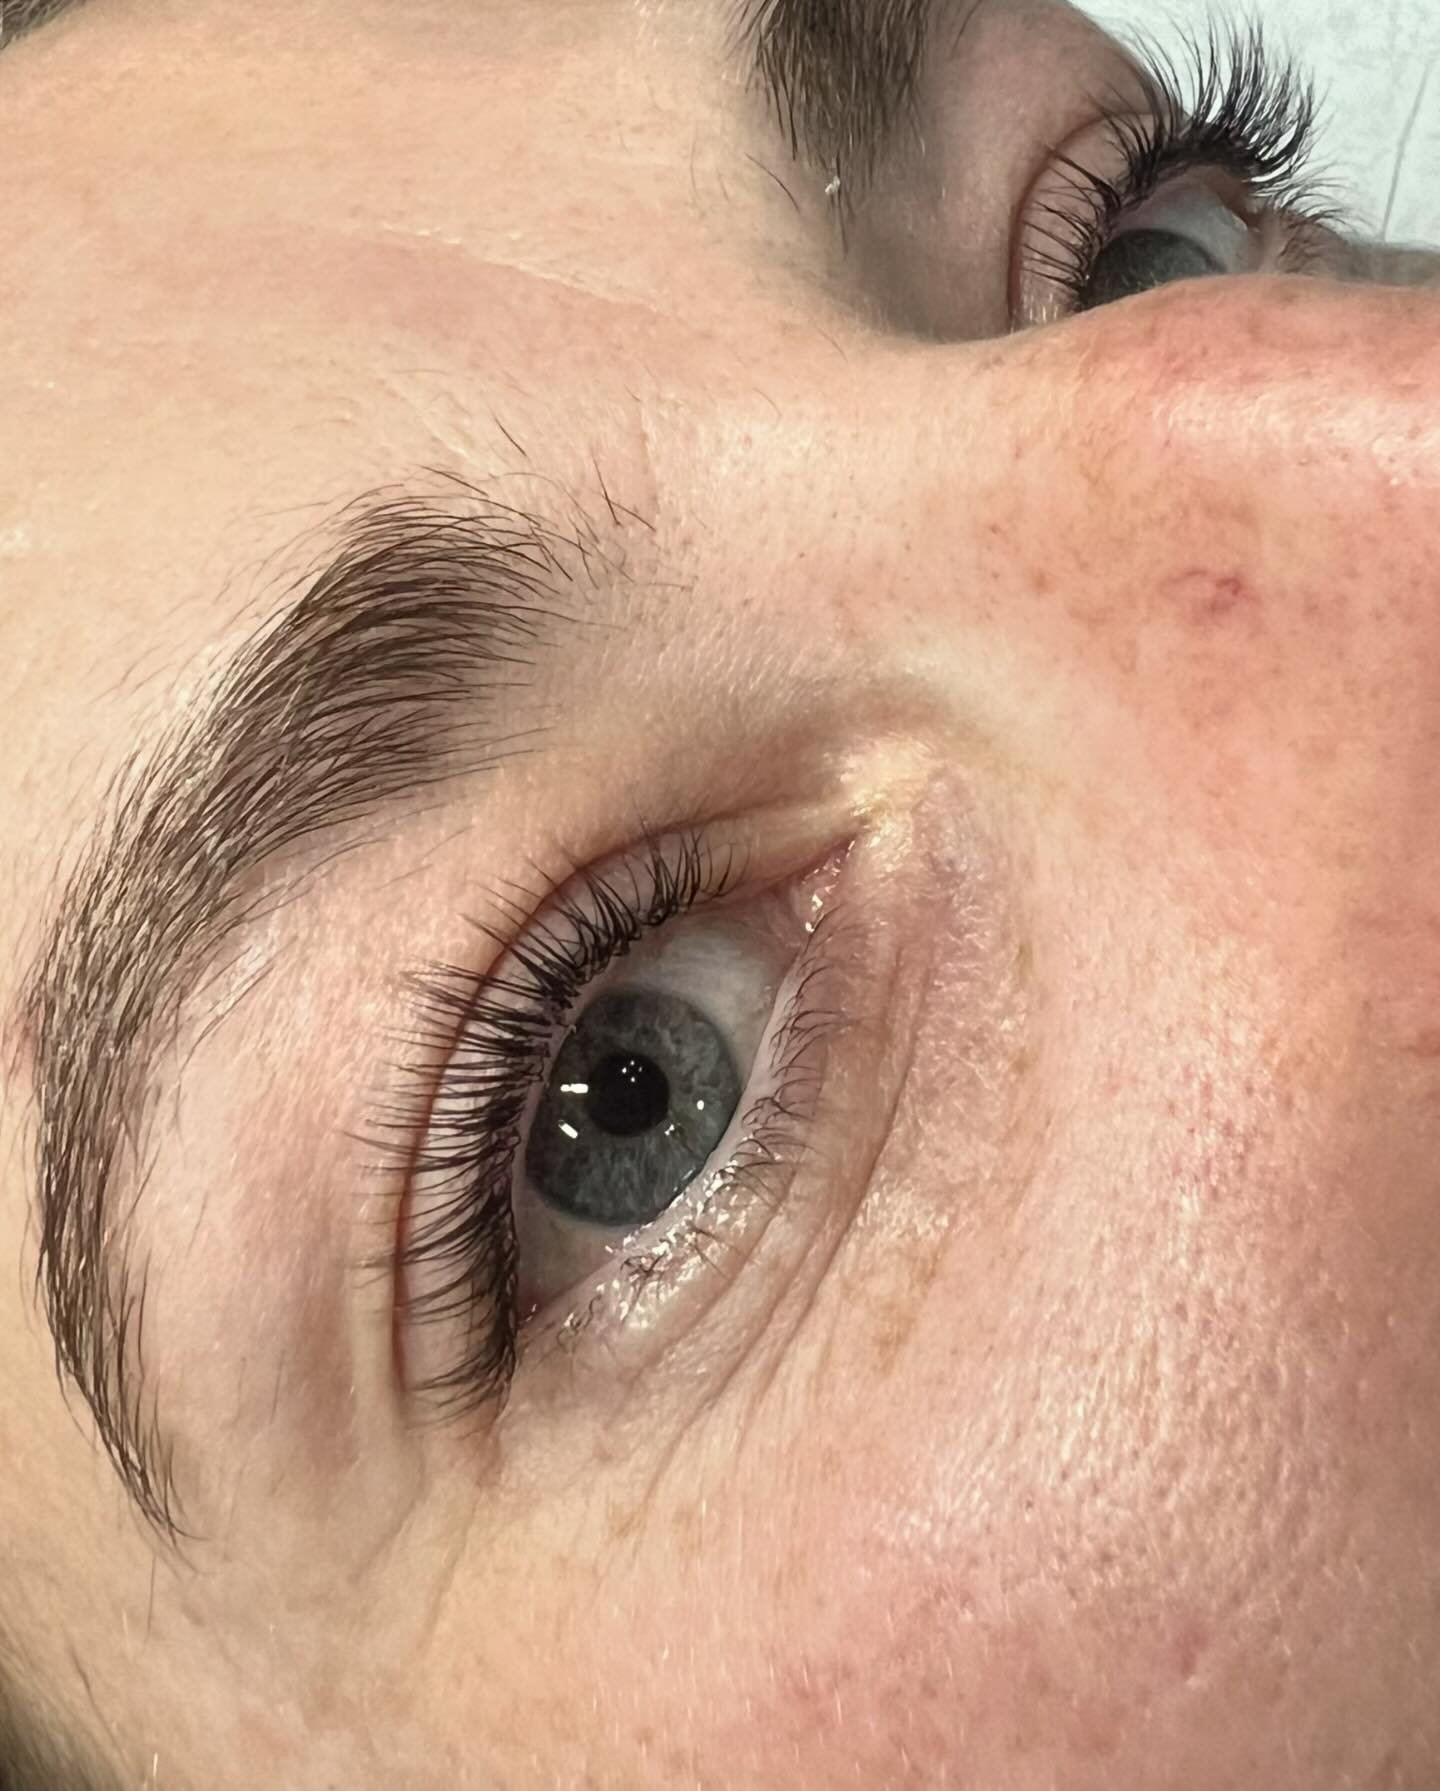 Lash Lift and Tint💕 

This client had got the most beautiful lashes for that perfect lift🙌🏻

~ Completely natural 
~ A must have treatment with little to no maintenance 
~ Lasting 4-6 weeks 

✨✨✨

#lashliftandtint #beautifulbrowsandlashes #lashbom